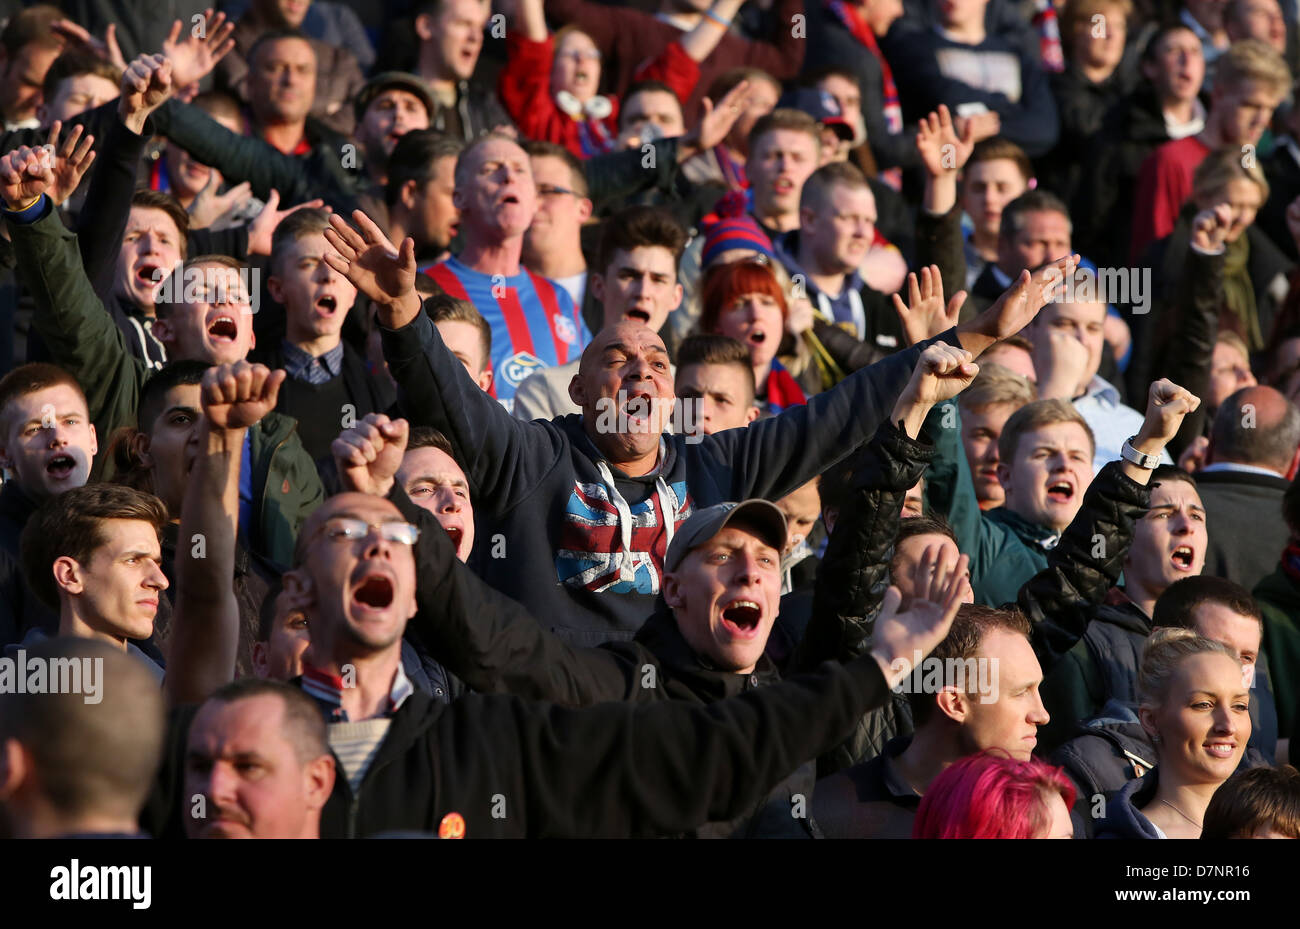 Football fans singing and chanting in the stands. Stock Photo